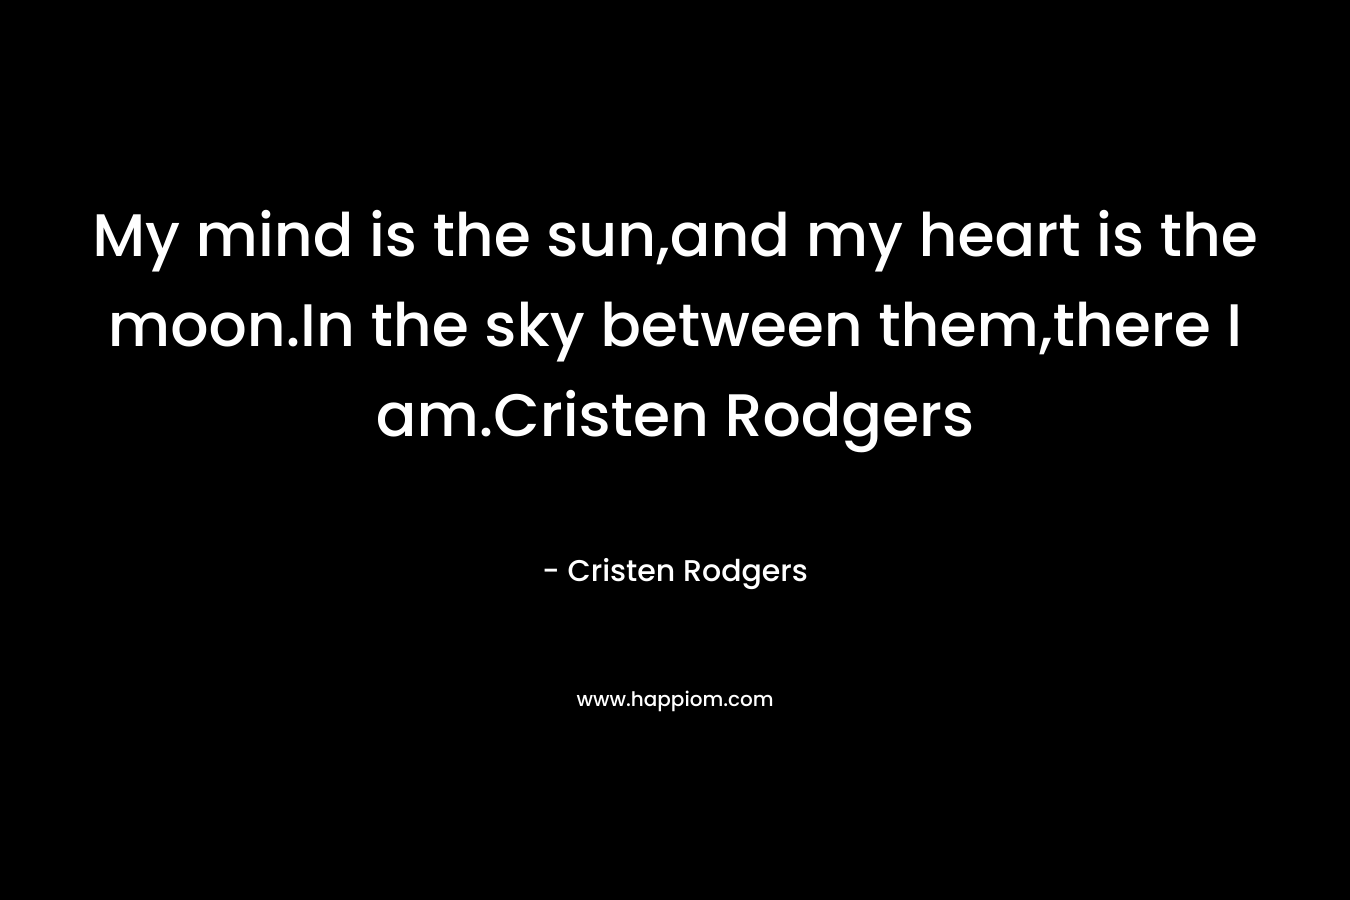 My mind is the sun,and my heart is the moon.In the sky between them,there I am.Cristen Rodgers